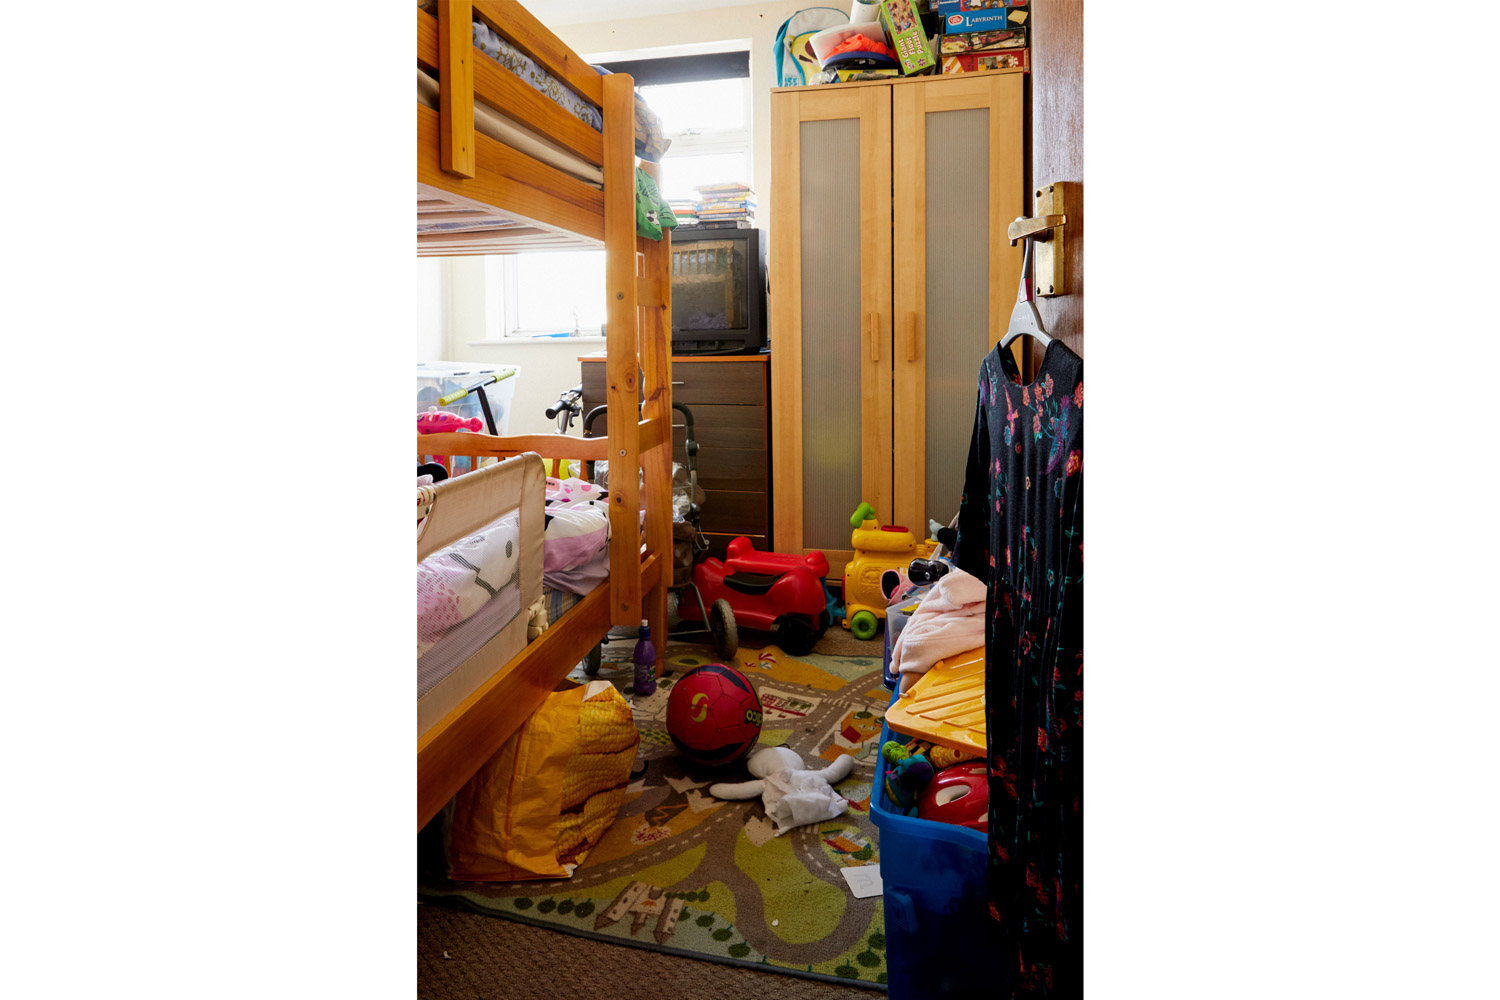   Dillan and Rachel   This room is shared by Dillan, eight, and his little sister Rachel. They live in temporary accommodation with their mum. There is no space in the flat for their older brother Kyle, who lives with his grandma.  The kids were spli